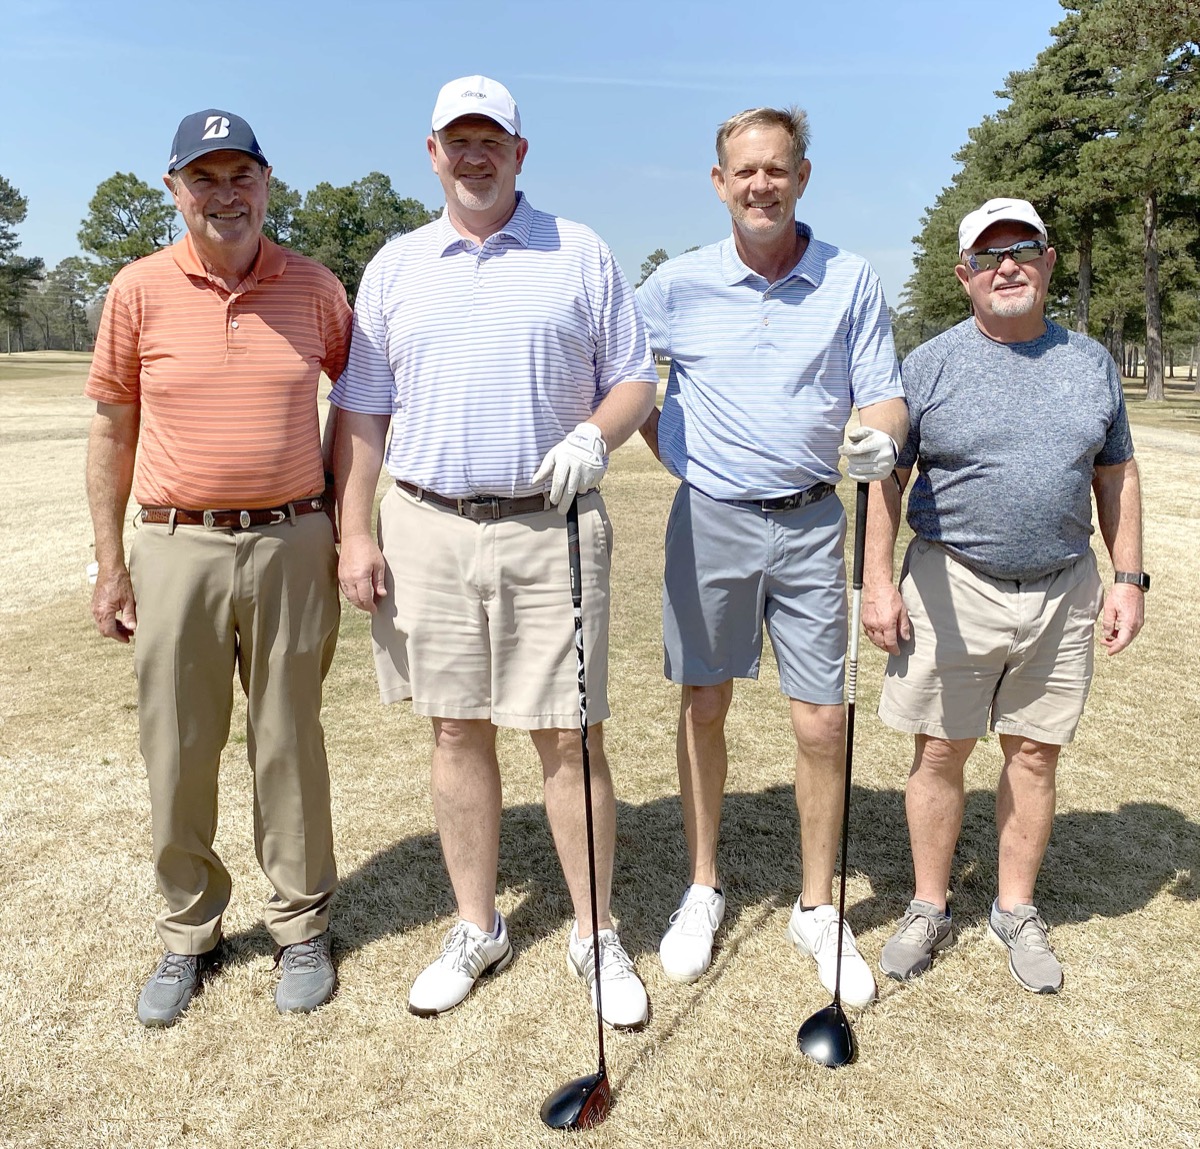 Click to enlarge,  The team of Steve Malone, Chris Hockaday, Nick Skatell, and Fred Rambeaut -- sponsored by Diversified Service Contracting, Inc. - finished third in the first flight in the 10th Central Carolina Community College Foundation Harnett Golf Classic March 23 at Chicora Golf Club. 